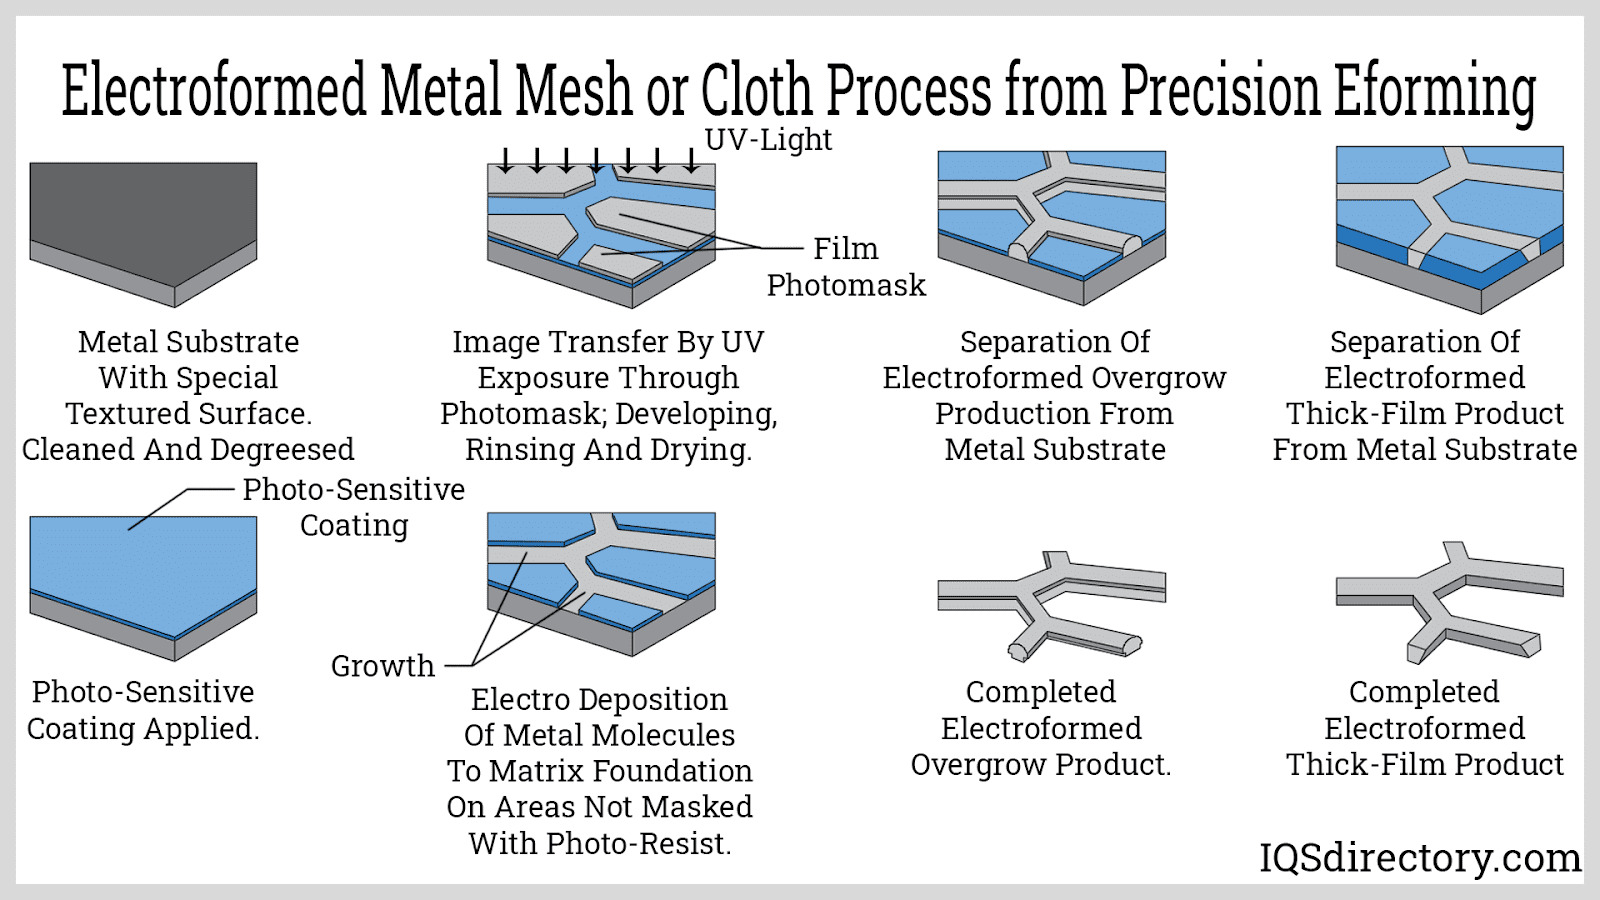 Electroformed Metal Mesh or Cloth Process from Precision Eforming